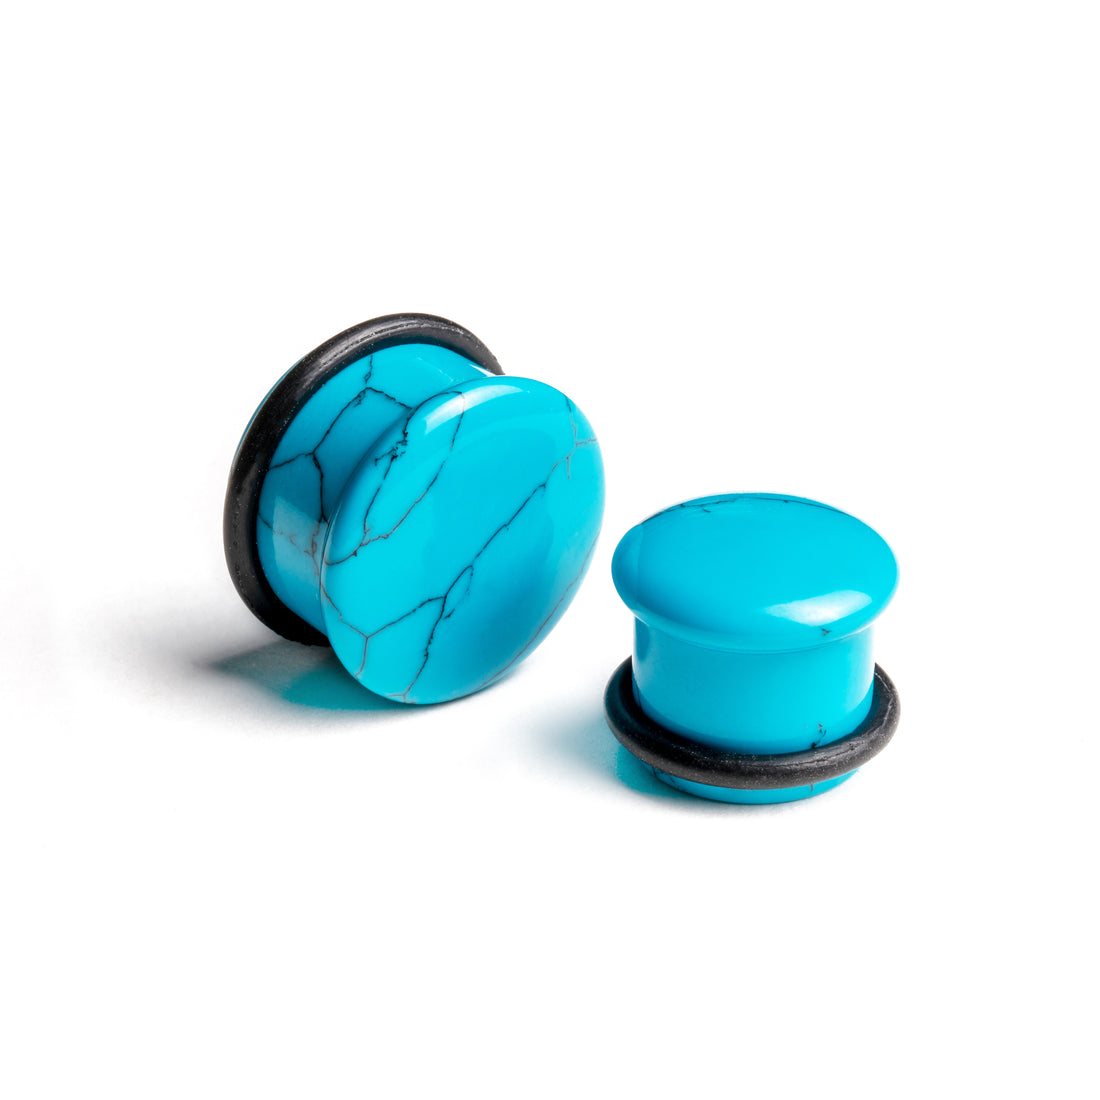 pair of flared Turquoise stone ear plugs side and front view